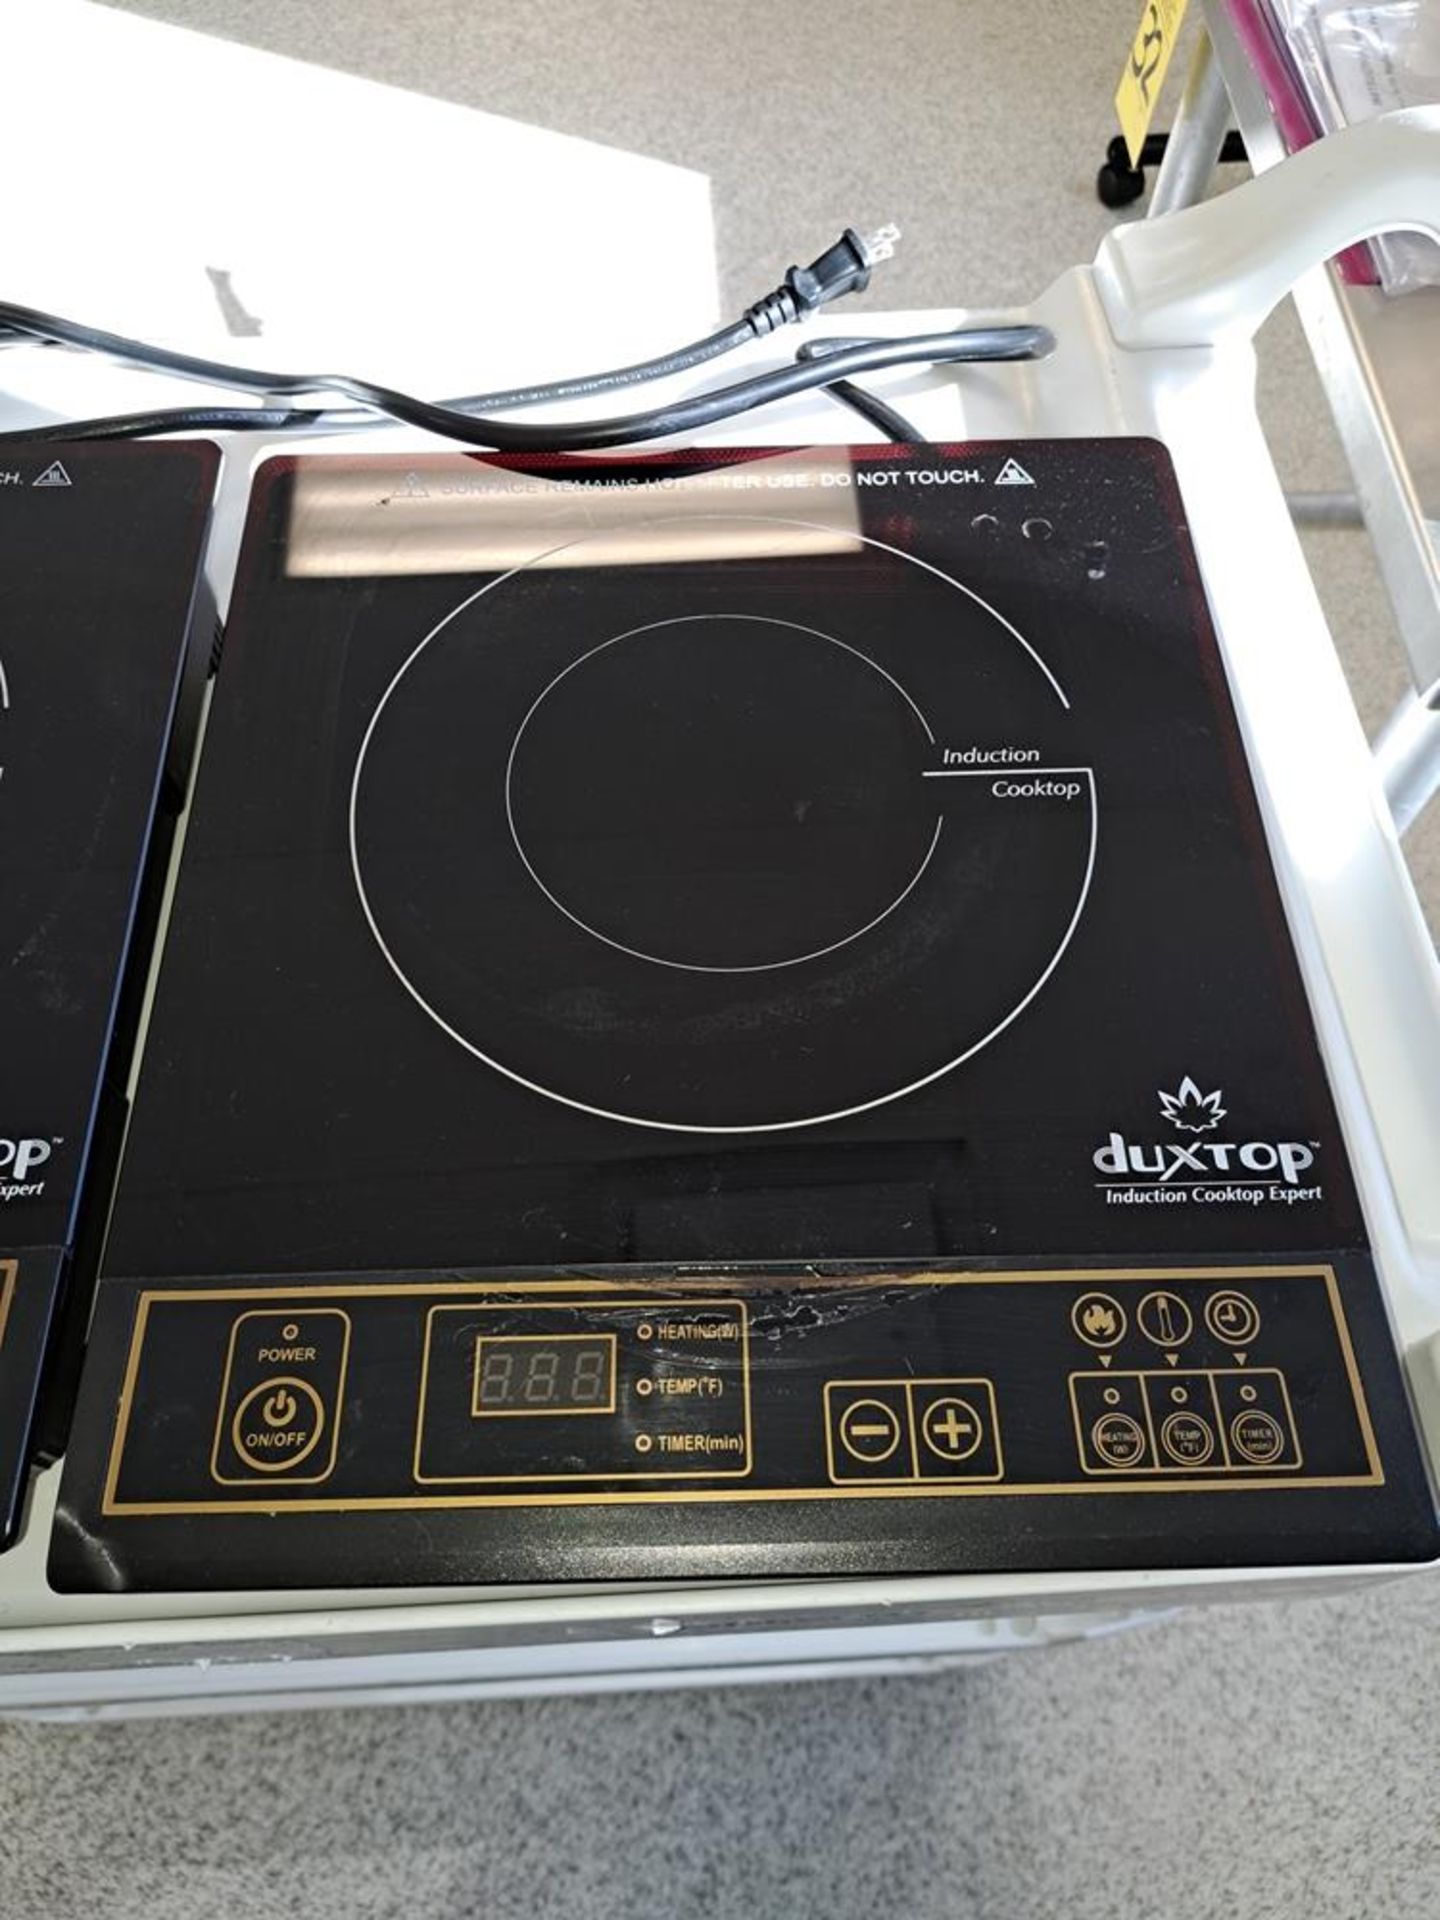 Dux Top Mdl. 8100MC Induction Cooktop, 11 1/2" W X 10 1/2" cooktop, 115 volts-Removal Is By - Image 3 of 3